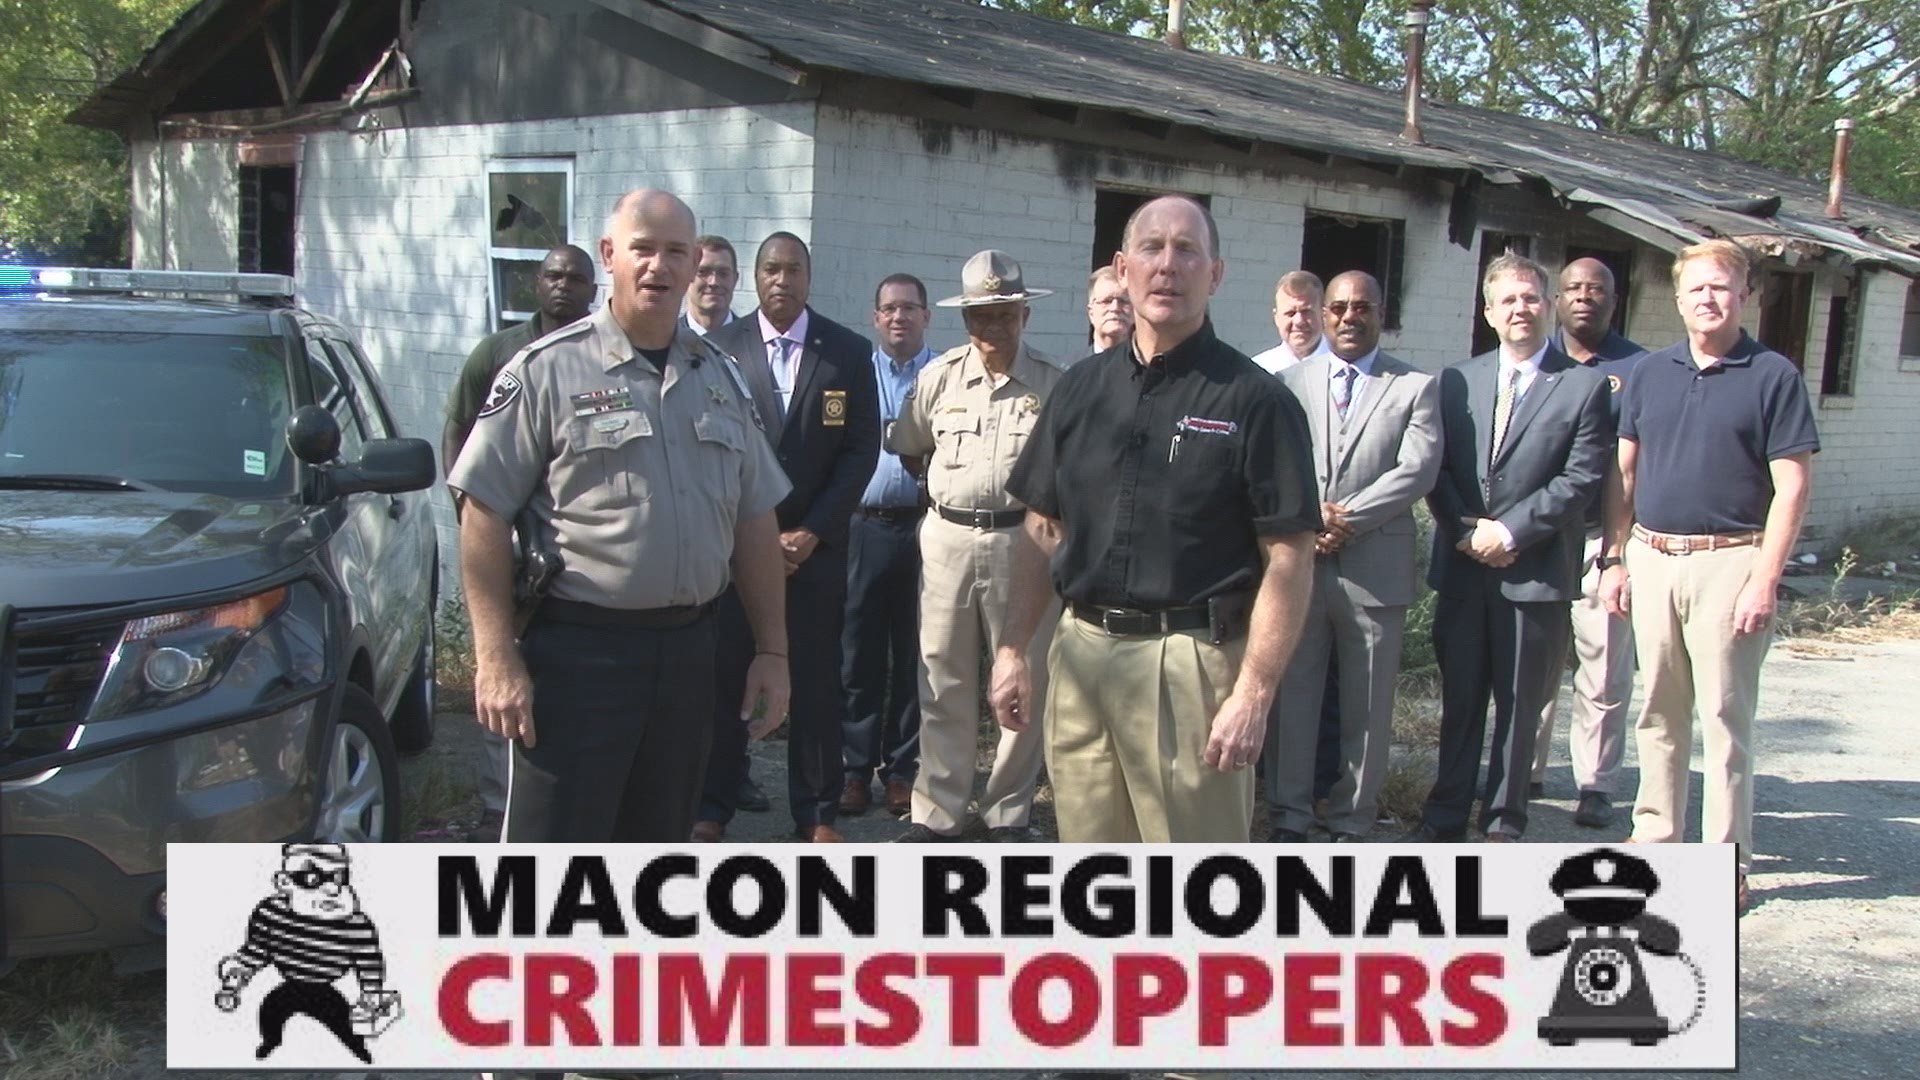 Wanted by Macon Regional Crimestoppers (September 19)